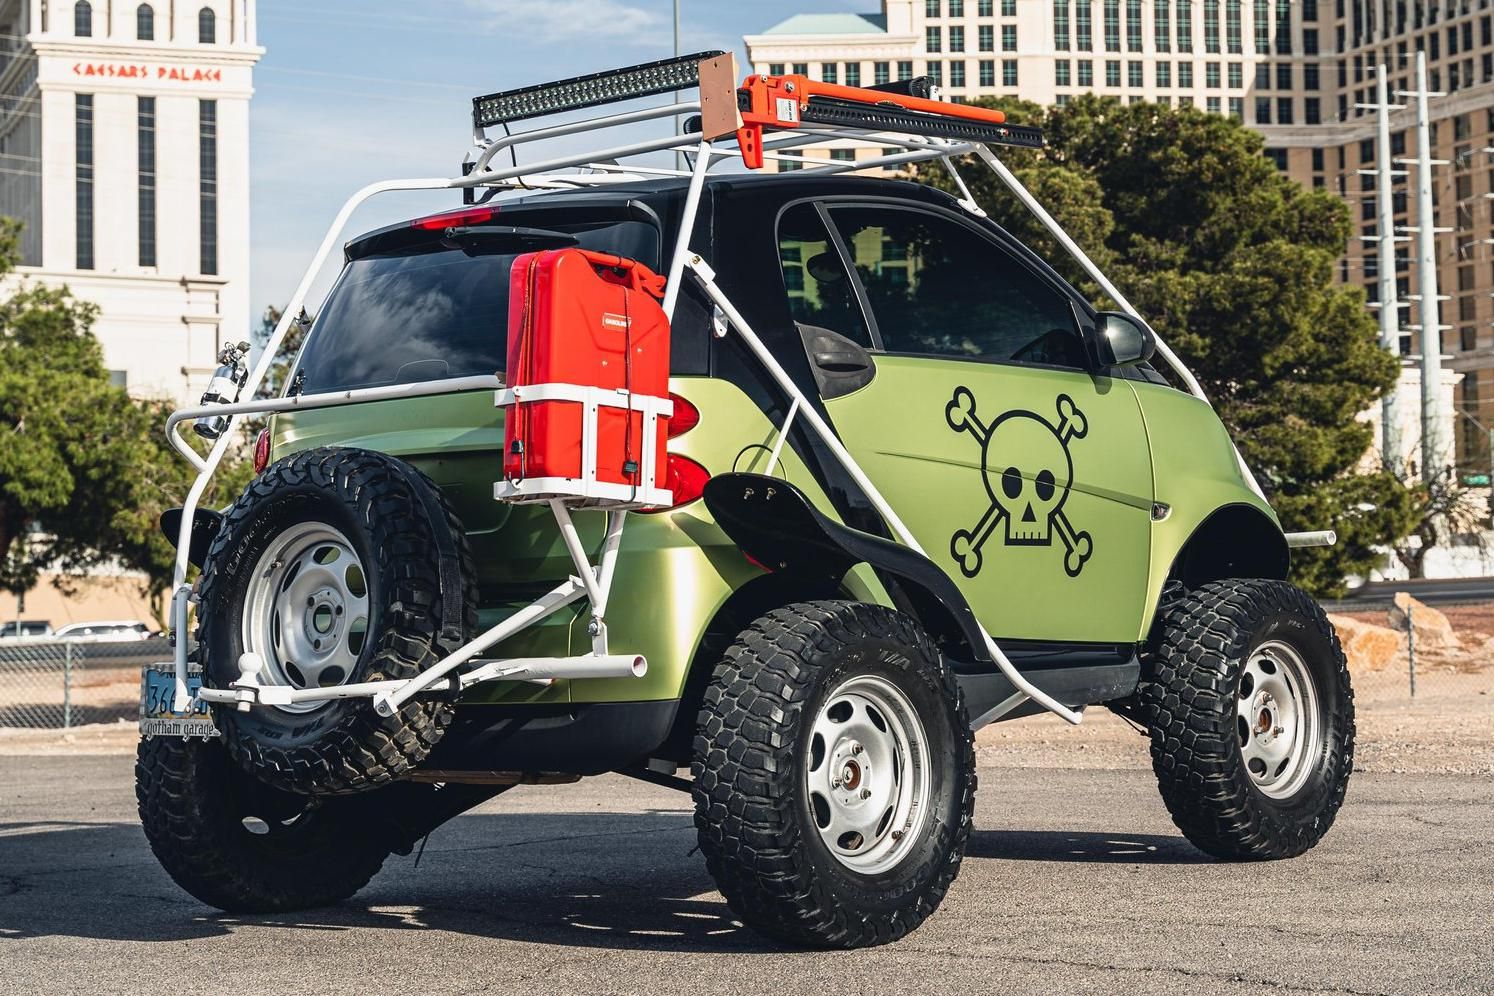 You’re Going to Want to Drive This Epic Off-Road Beast of a Smart Car